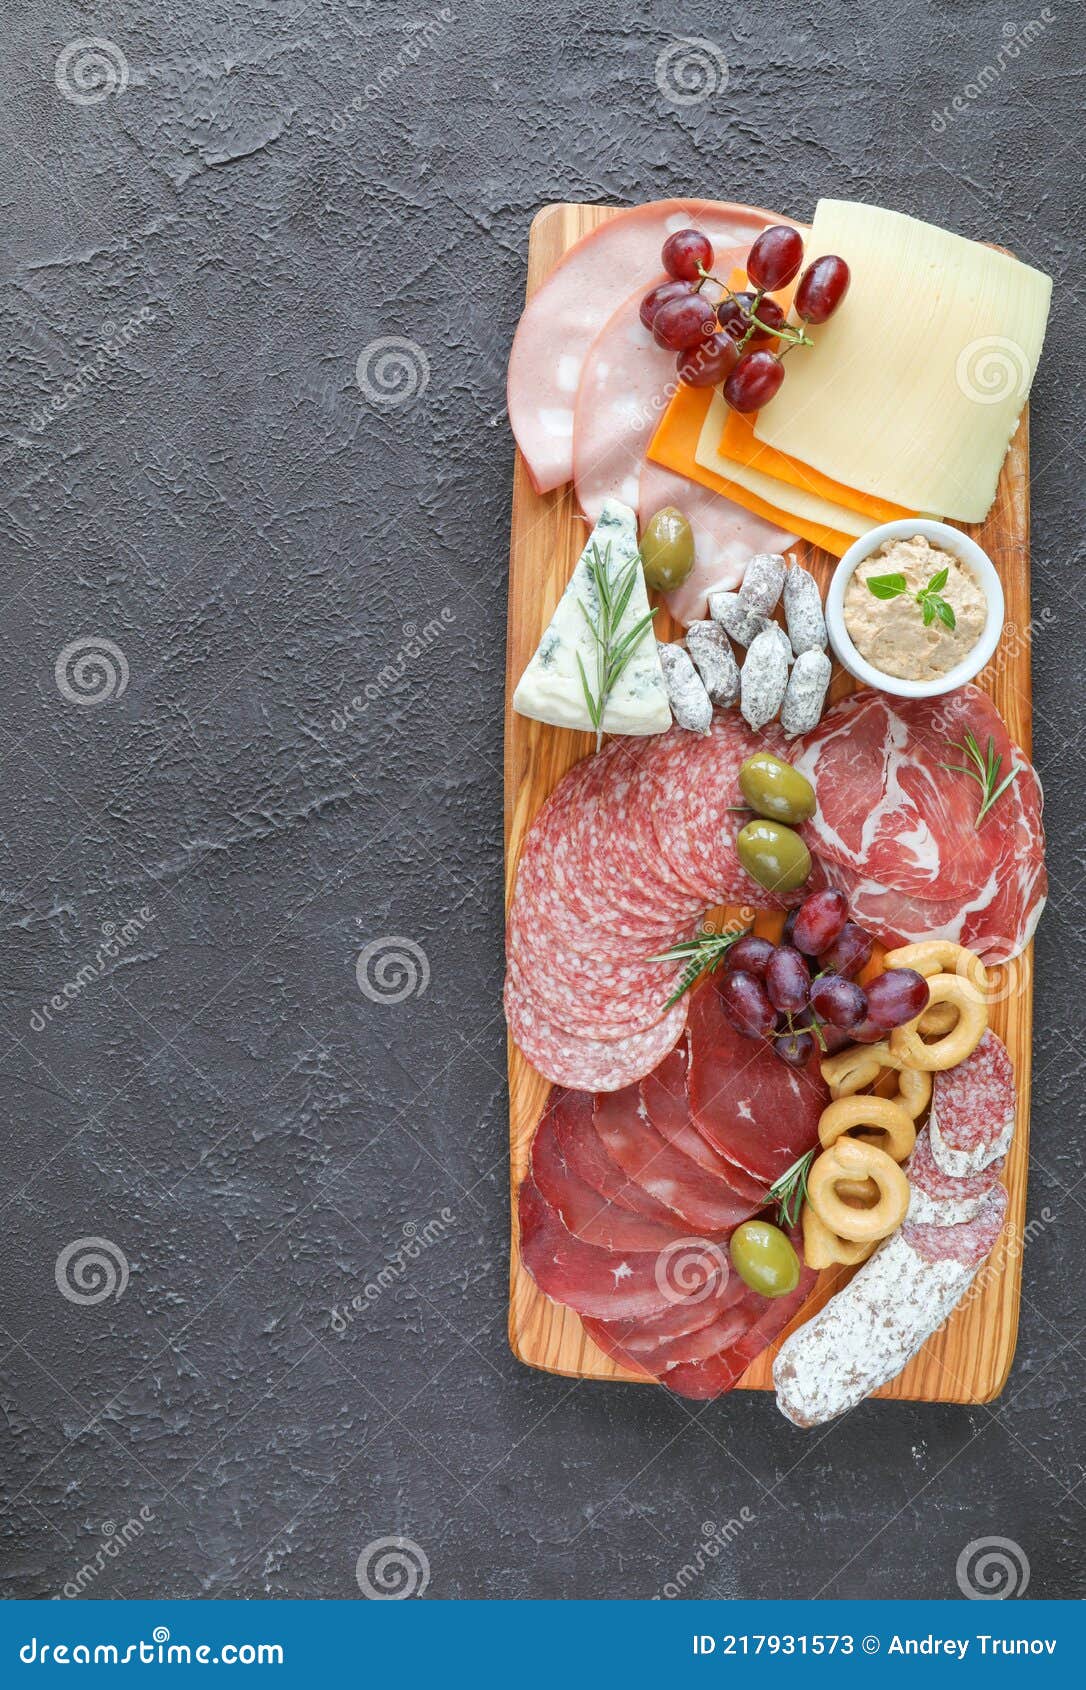 meat board with products from the italian region to wine - sausages, cheeses, bread, fresh vegetables, green herbs, and grapes -